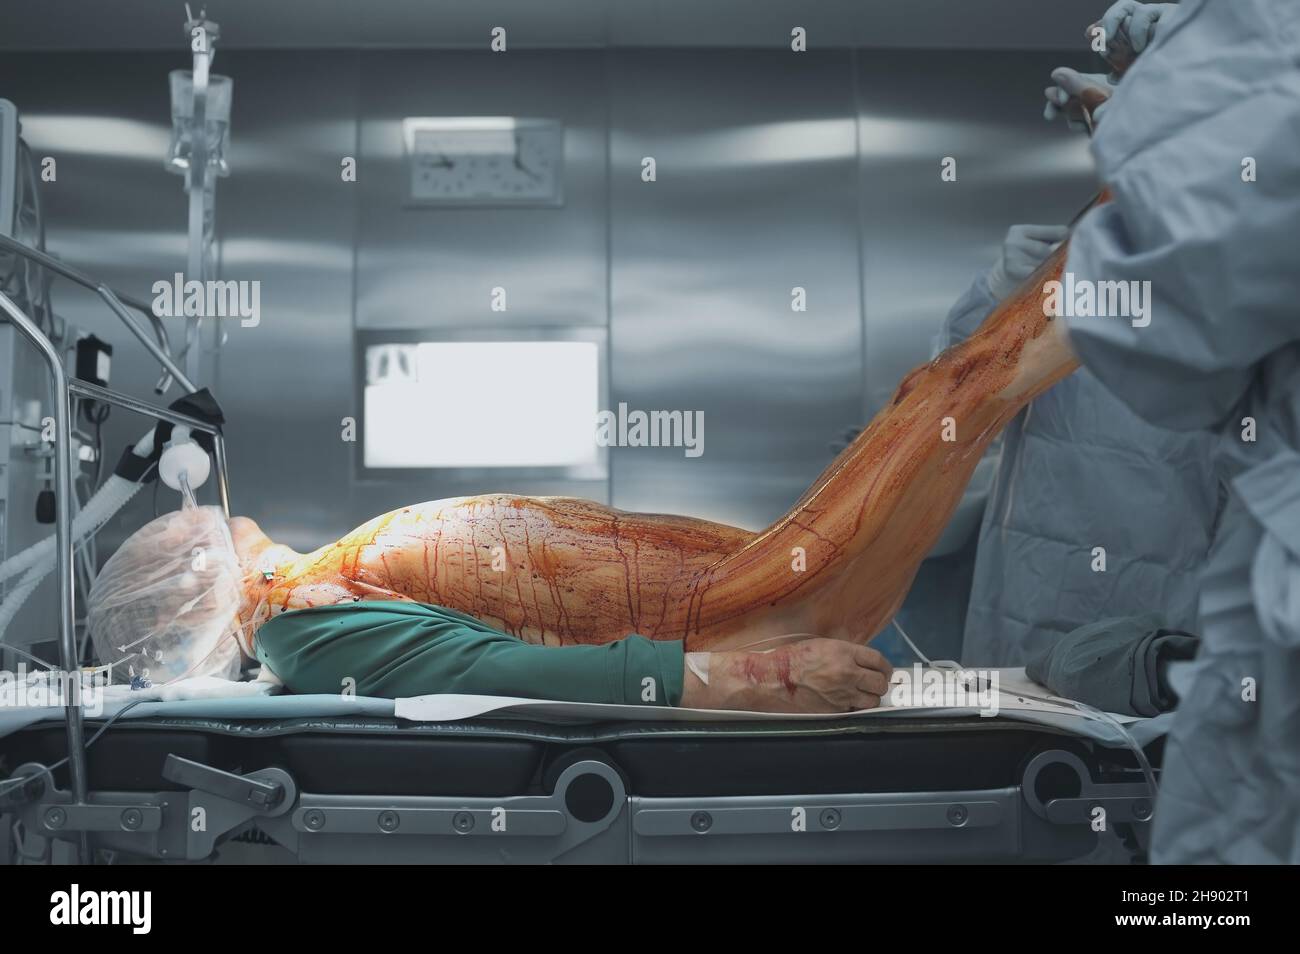 Sleeping patient on the surgical table and working surgeons in the modern operating theatre. Stock Photo